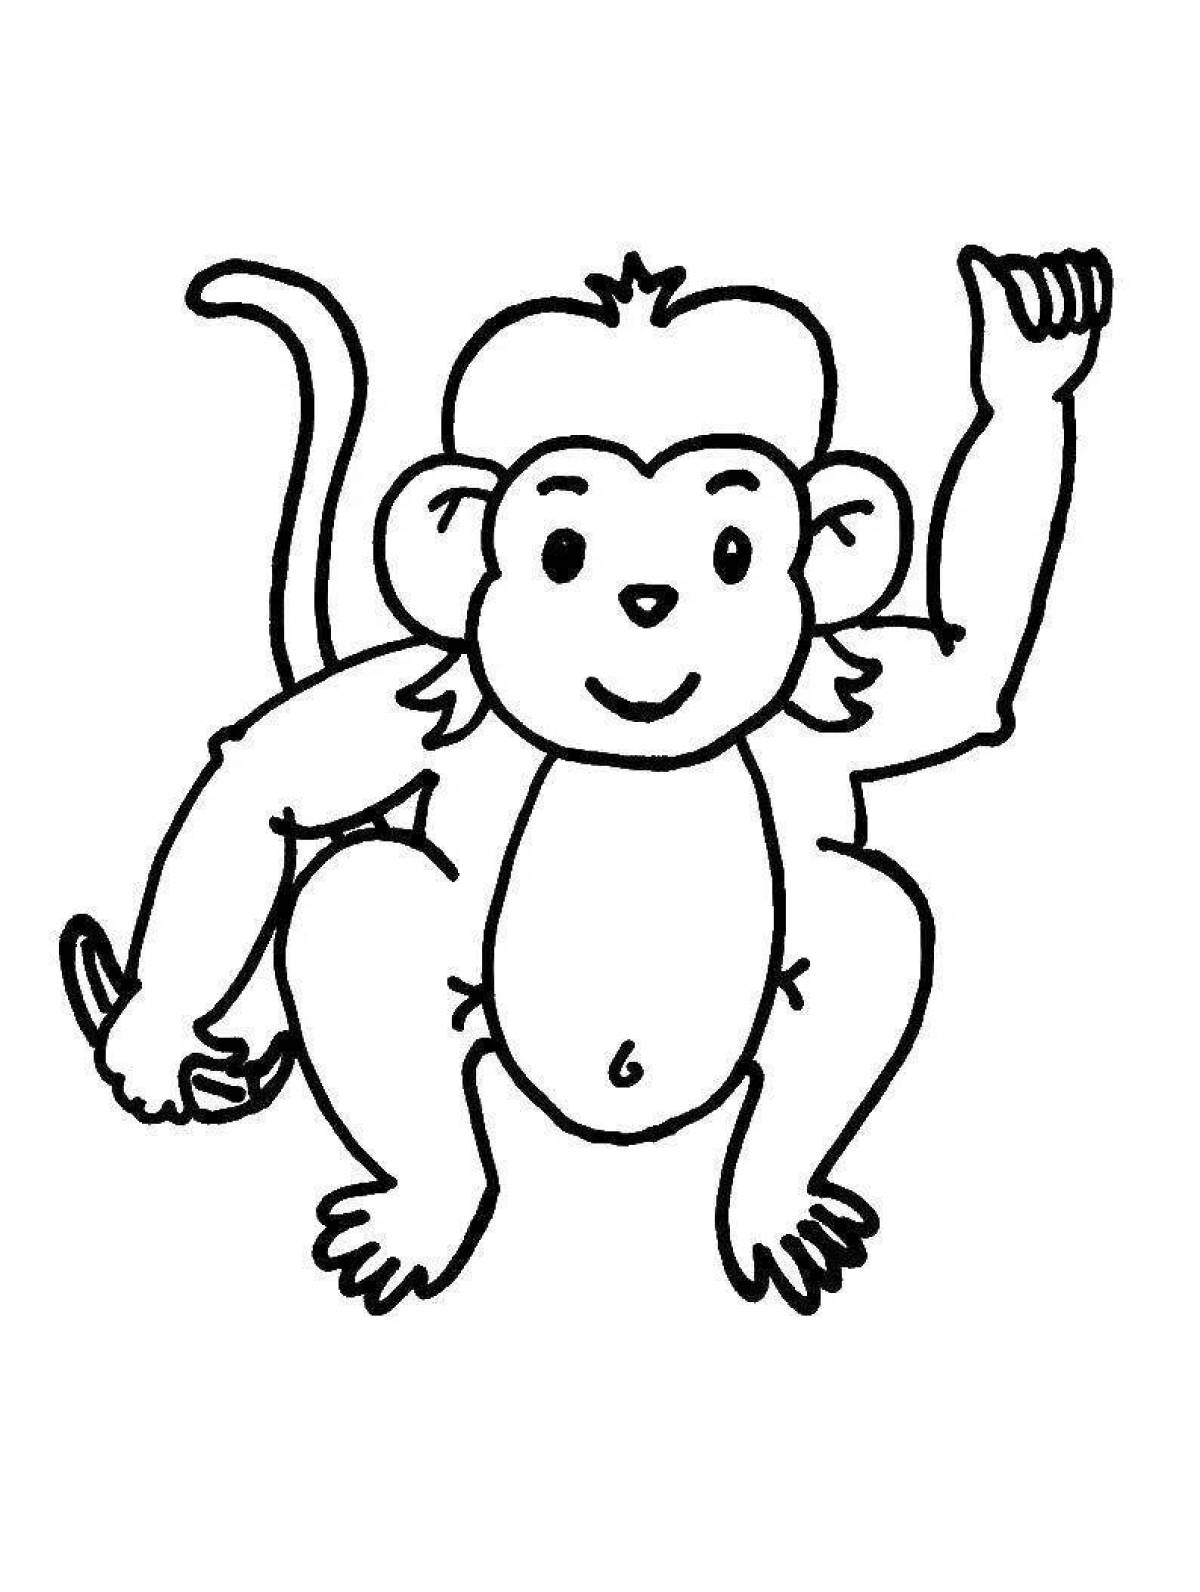 Colorful chimpanzee coloring pages for kids